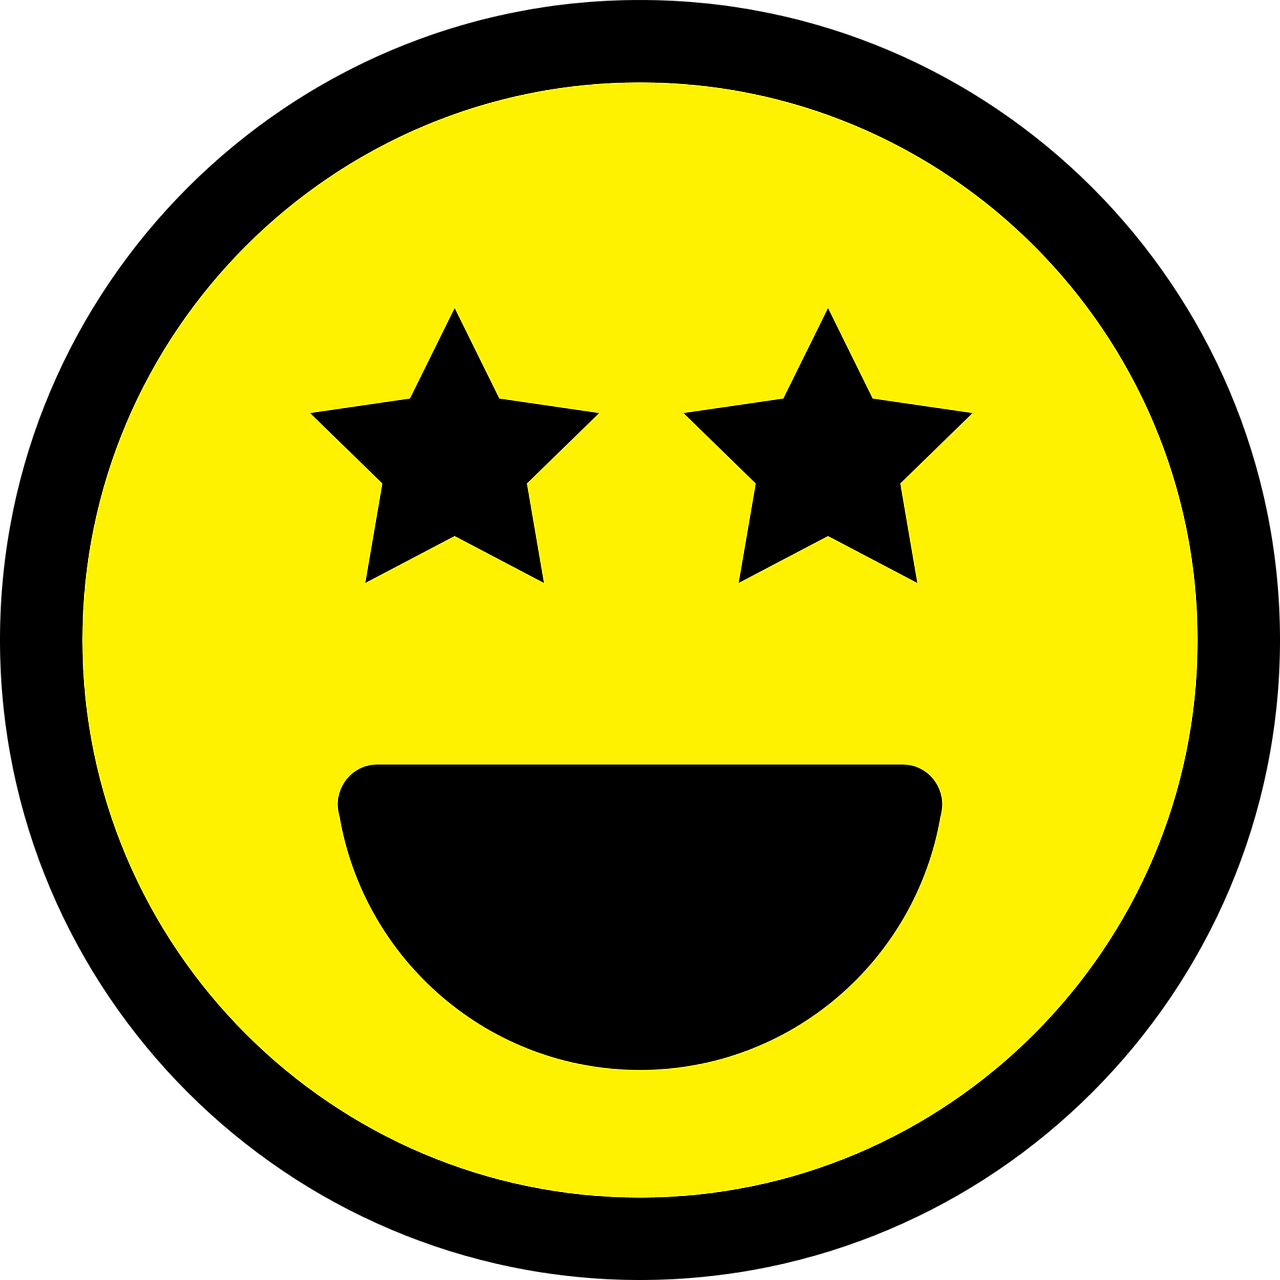 a smiley face with three stars on it, mingei, on a flat color black background, extreme emotion, symmetical face, yellow